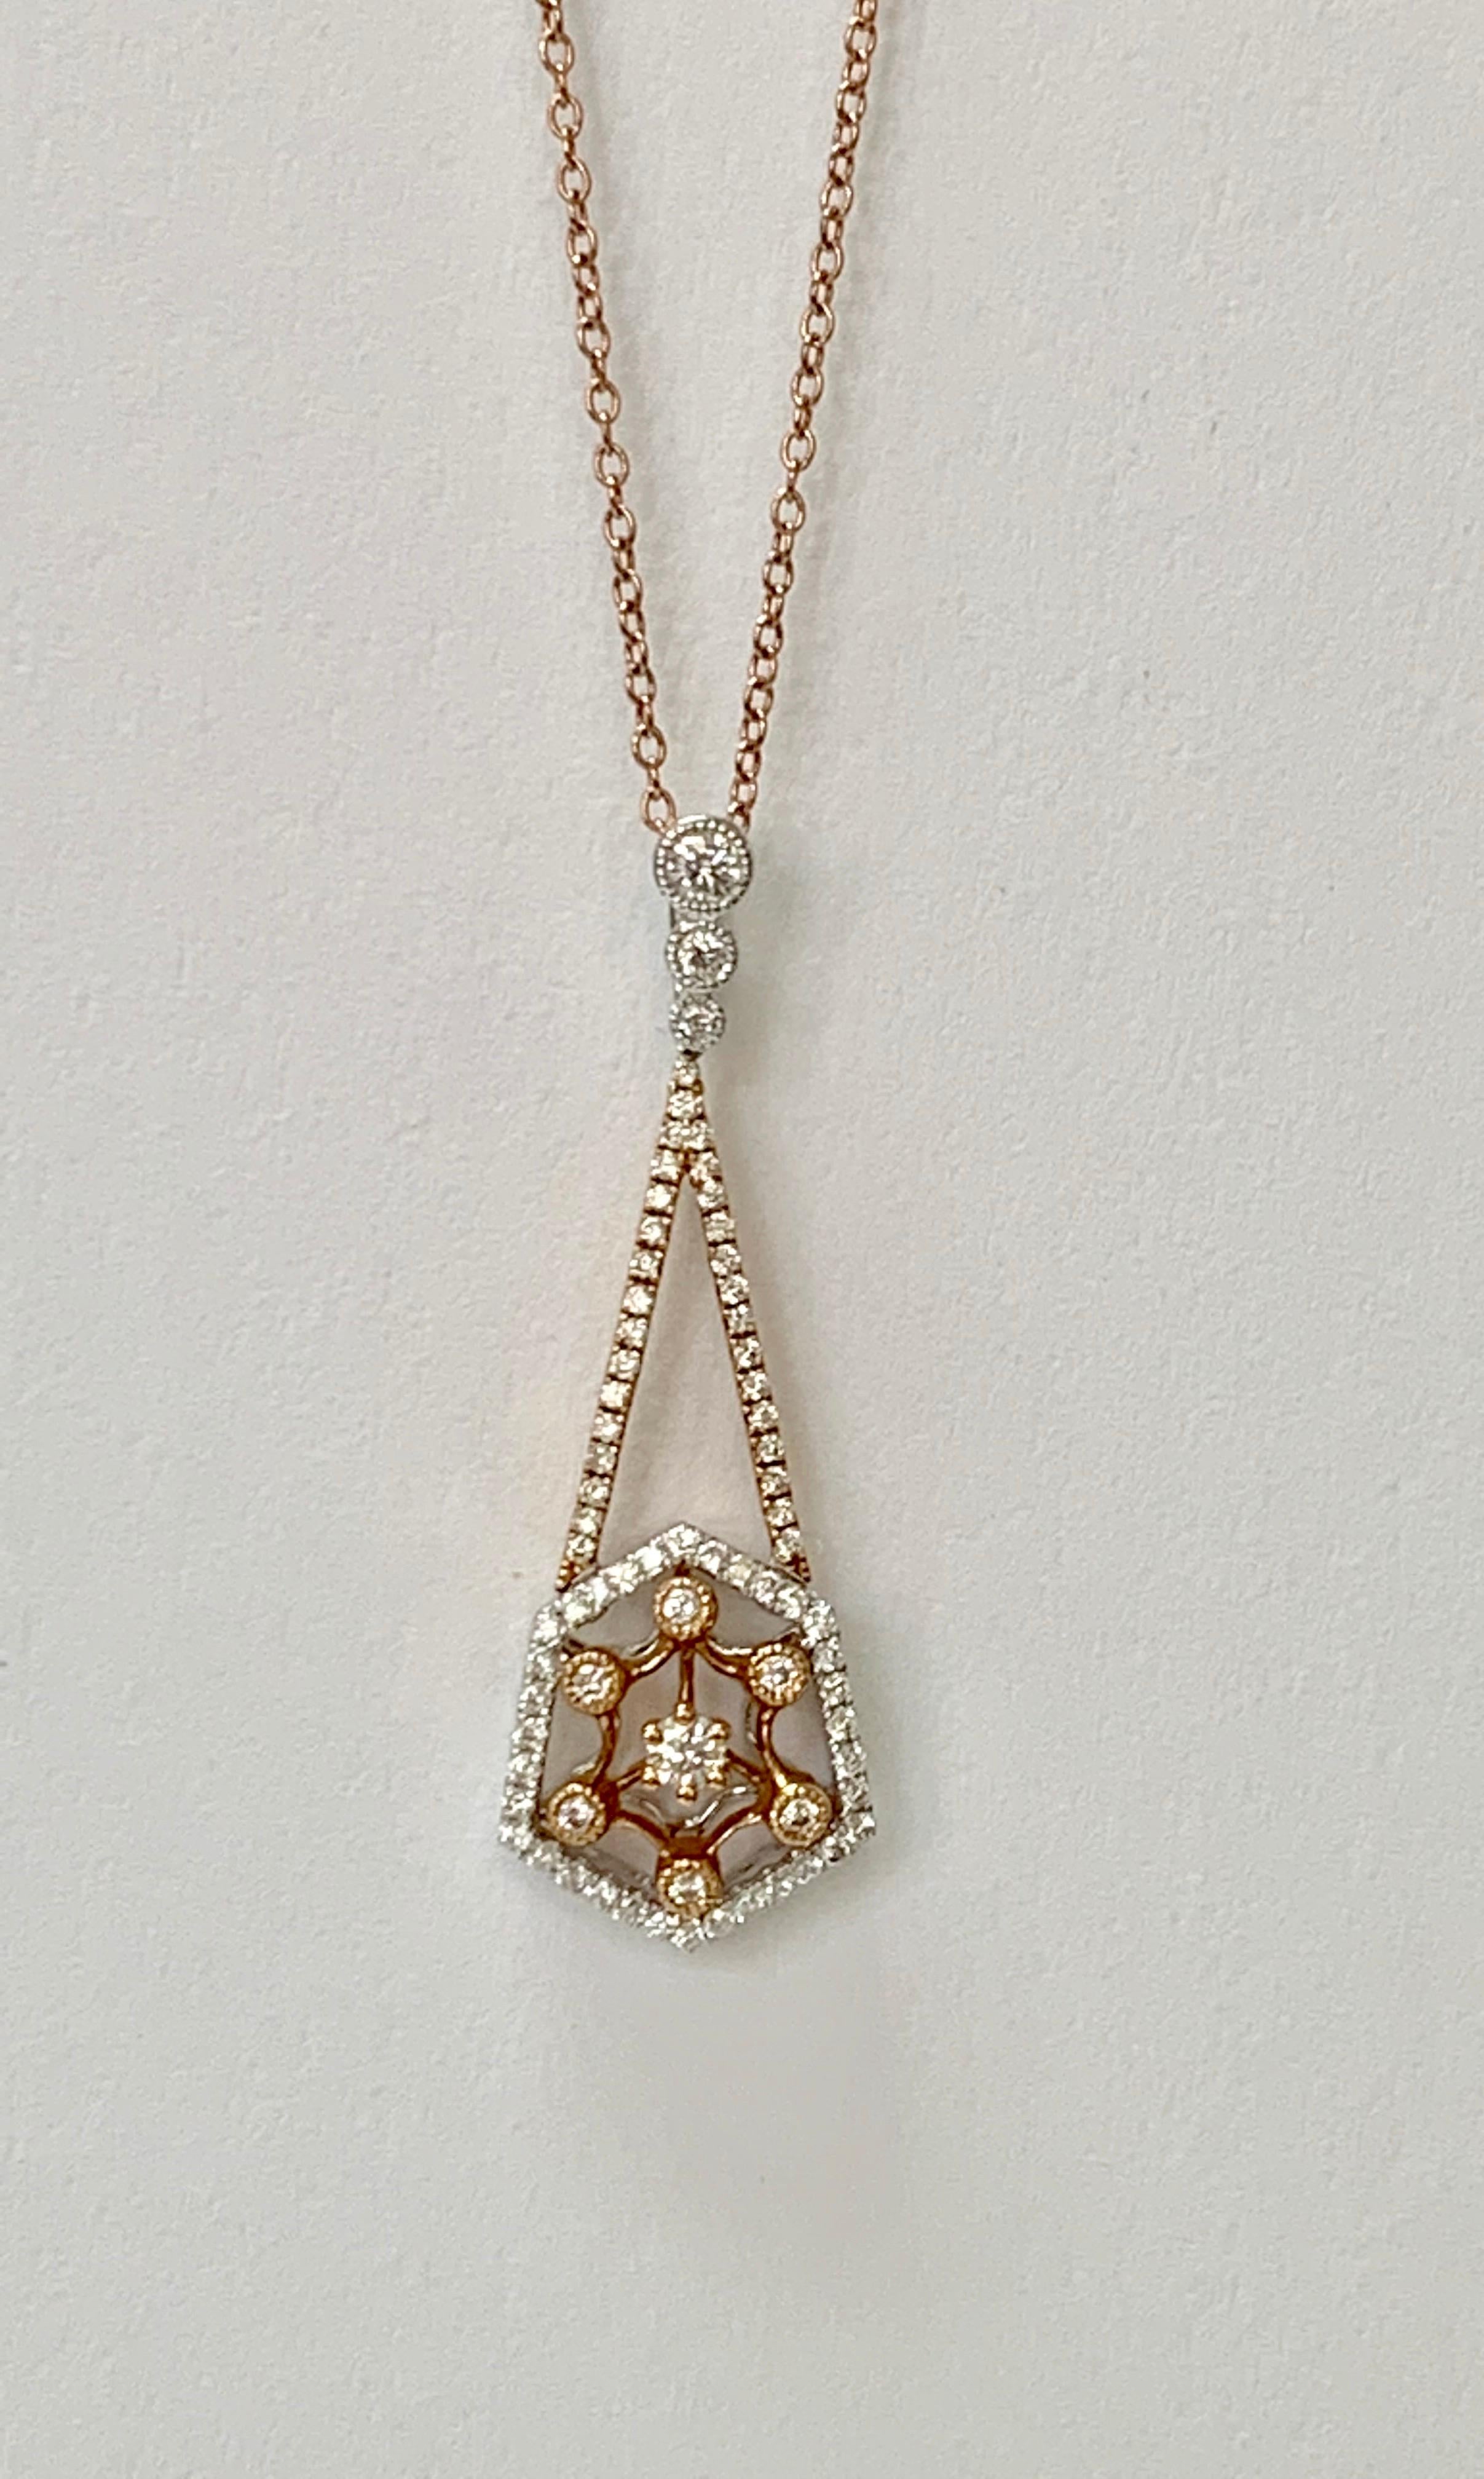 Very pretty diamond pendant necklace in Rose Gold. 

Diamond weight : 1.05 carat ( GH color and VS clarity ) 
Metal : Rose Gold 
Measurement : 1 inch 
